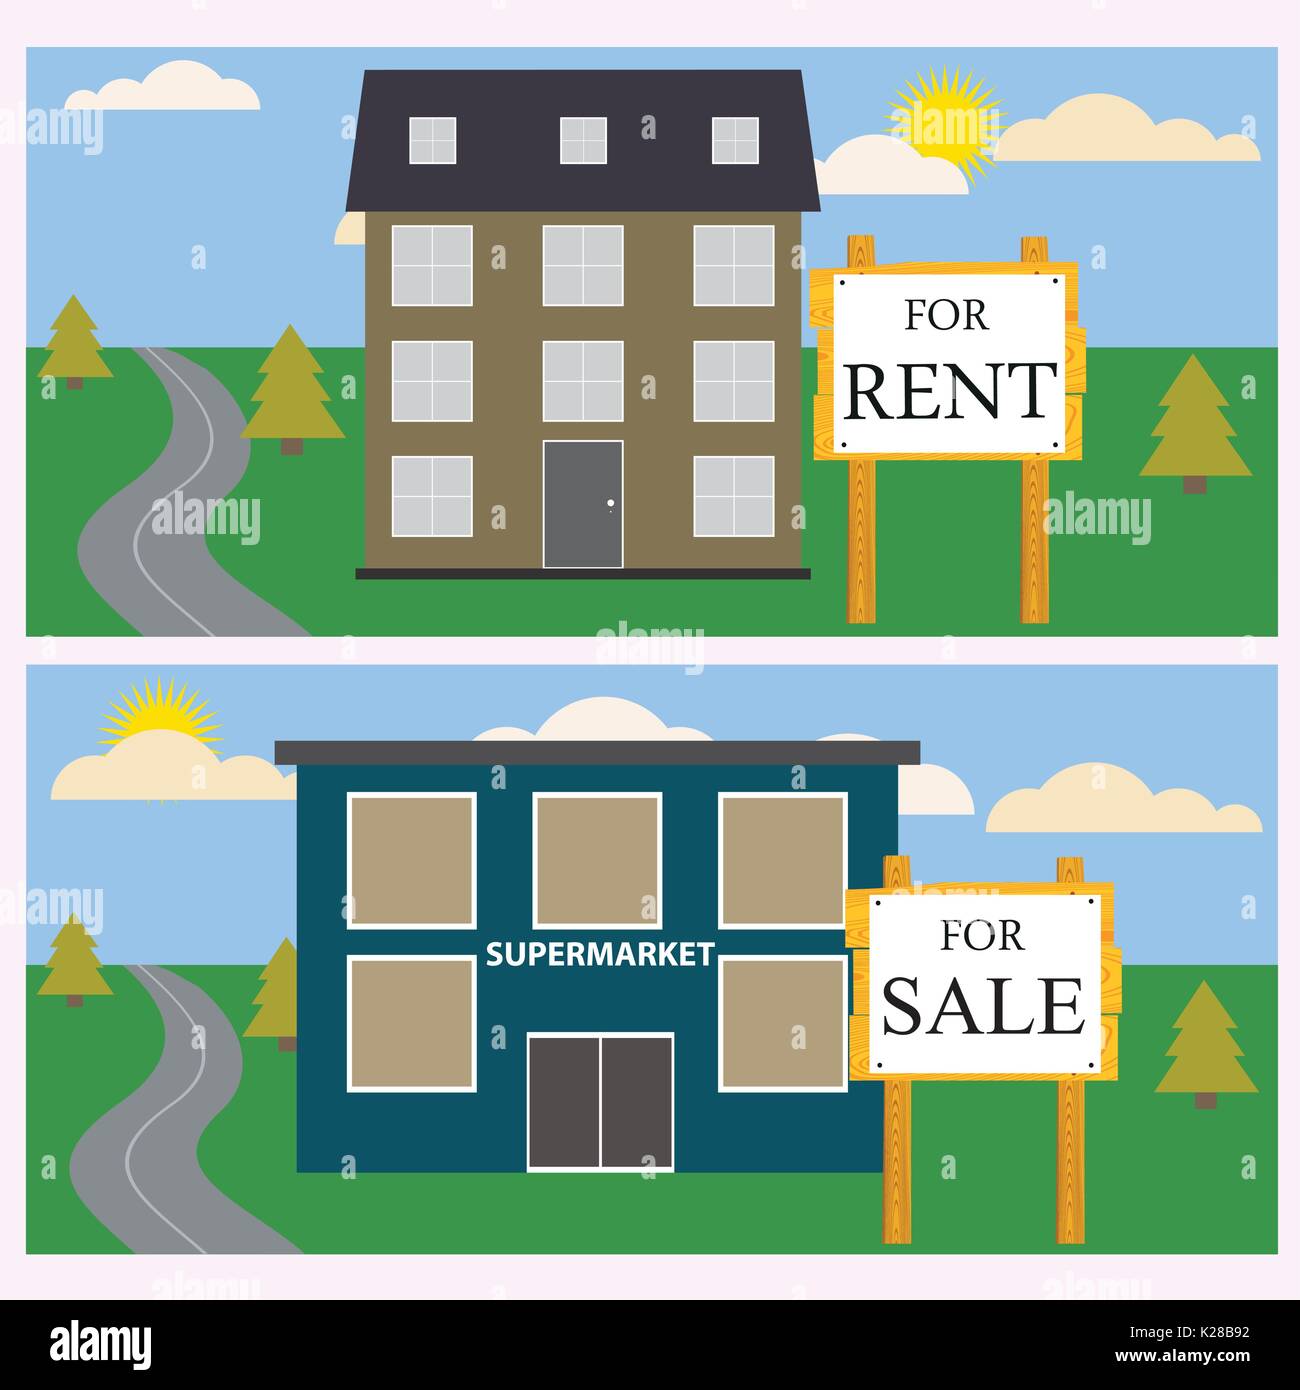 House for rent or for sale. Vector illustration. Stock Vector